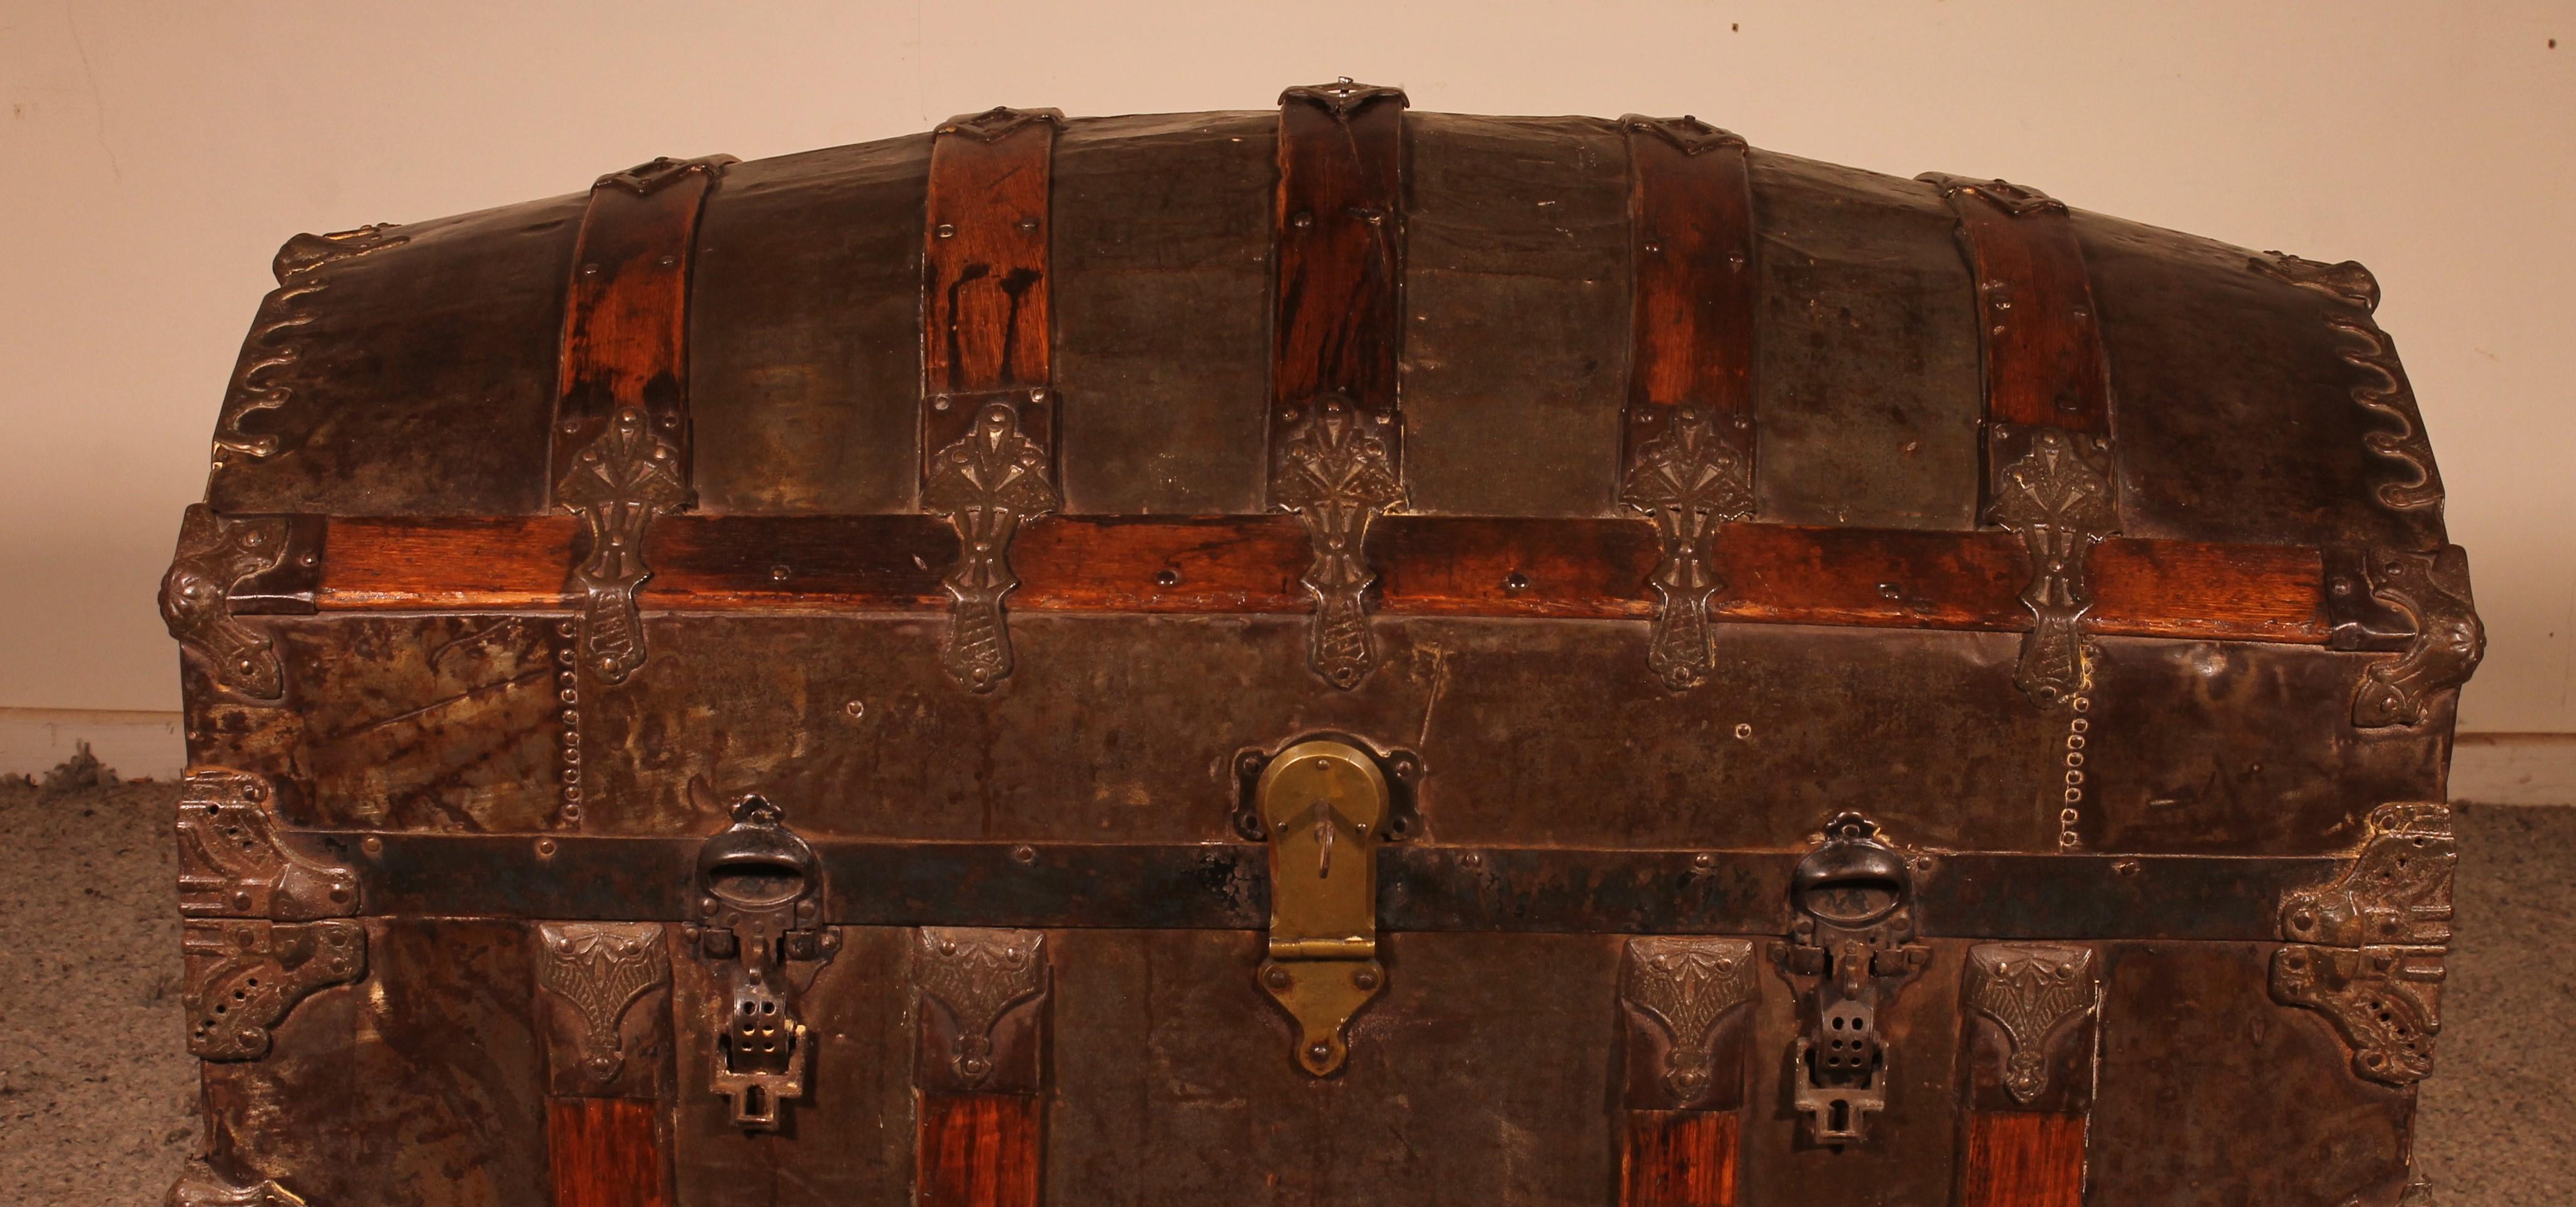 Superb officer's trunk in wood and iron from the Empire period 19 century

Very beautiful and rare trunk covered with a thin layer of iron and resting on wheels
Very beautiful work of wrought iron
It has its leather carrying handles where we can